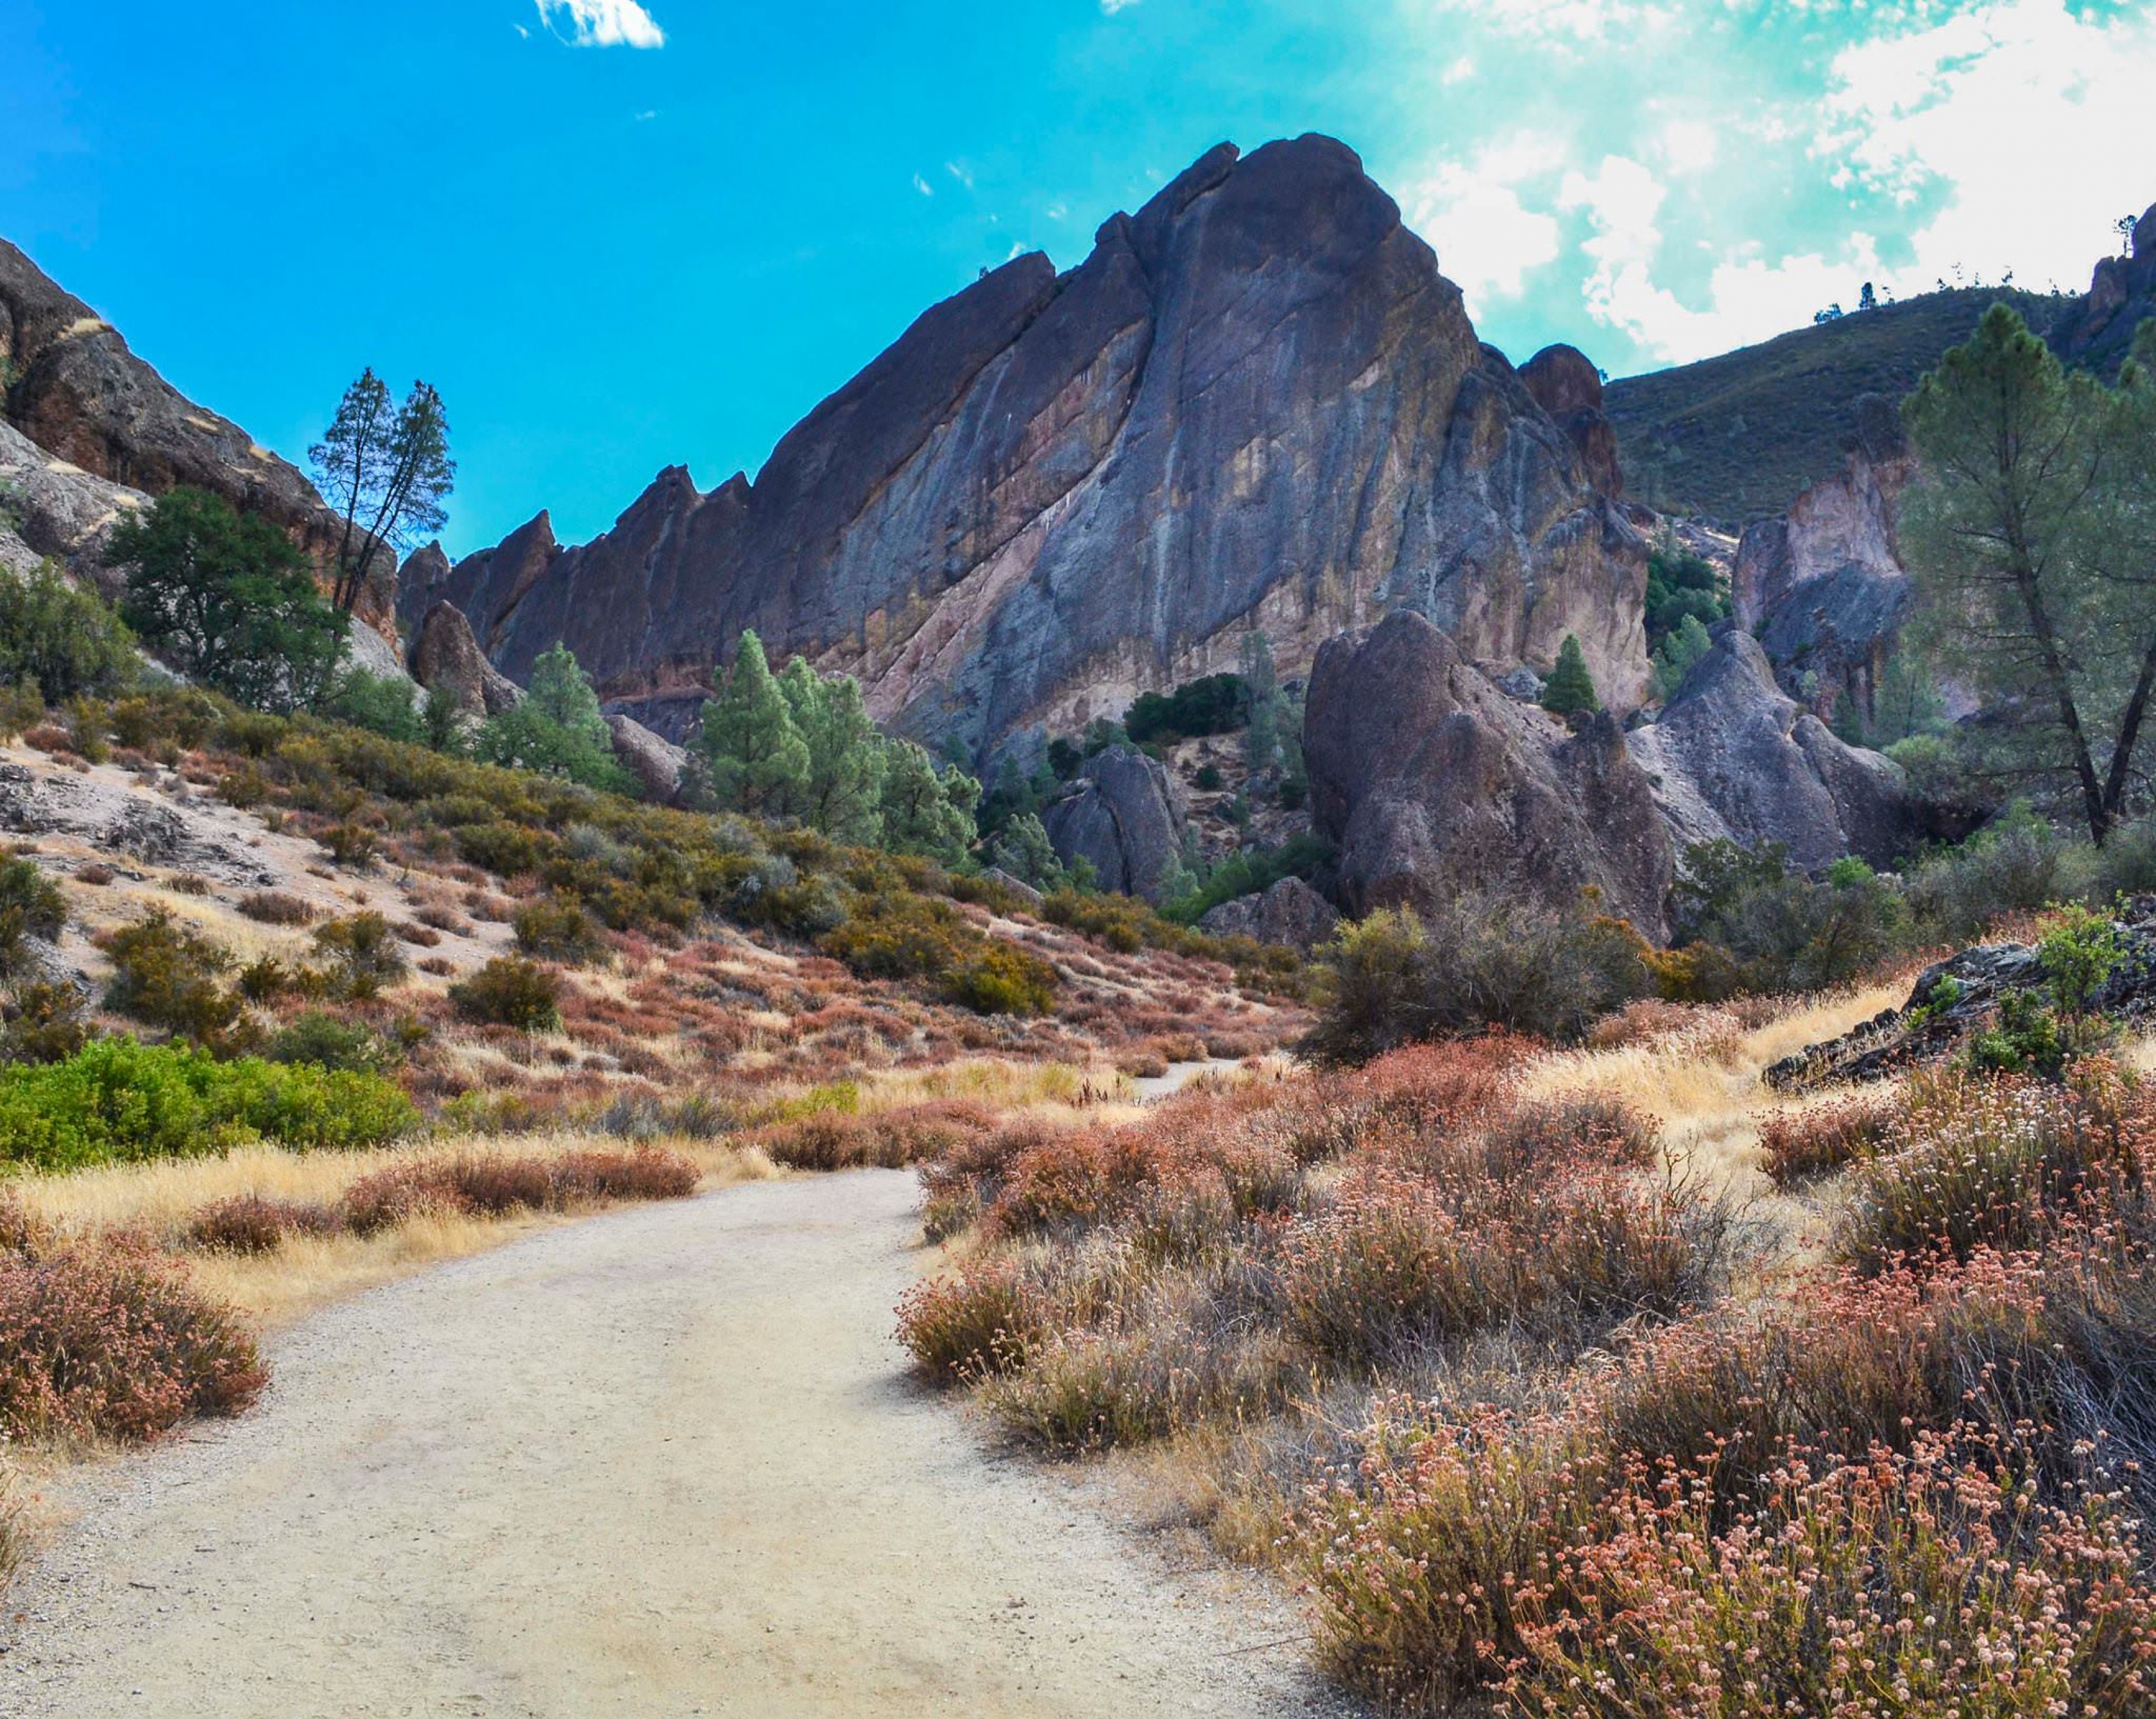 A landscape at Pinnacles National Park, formally a National Monument.